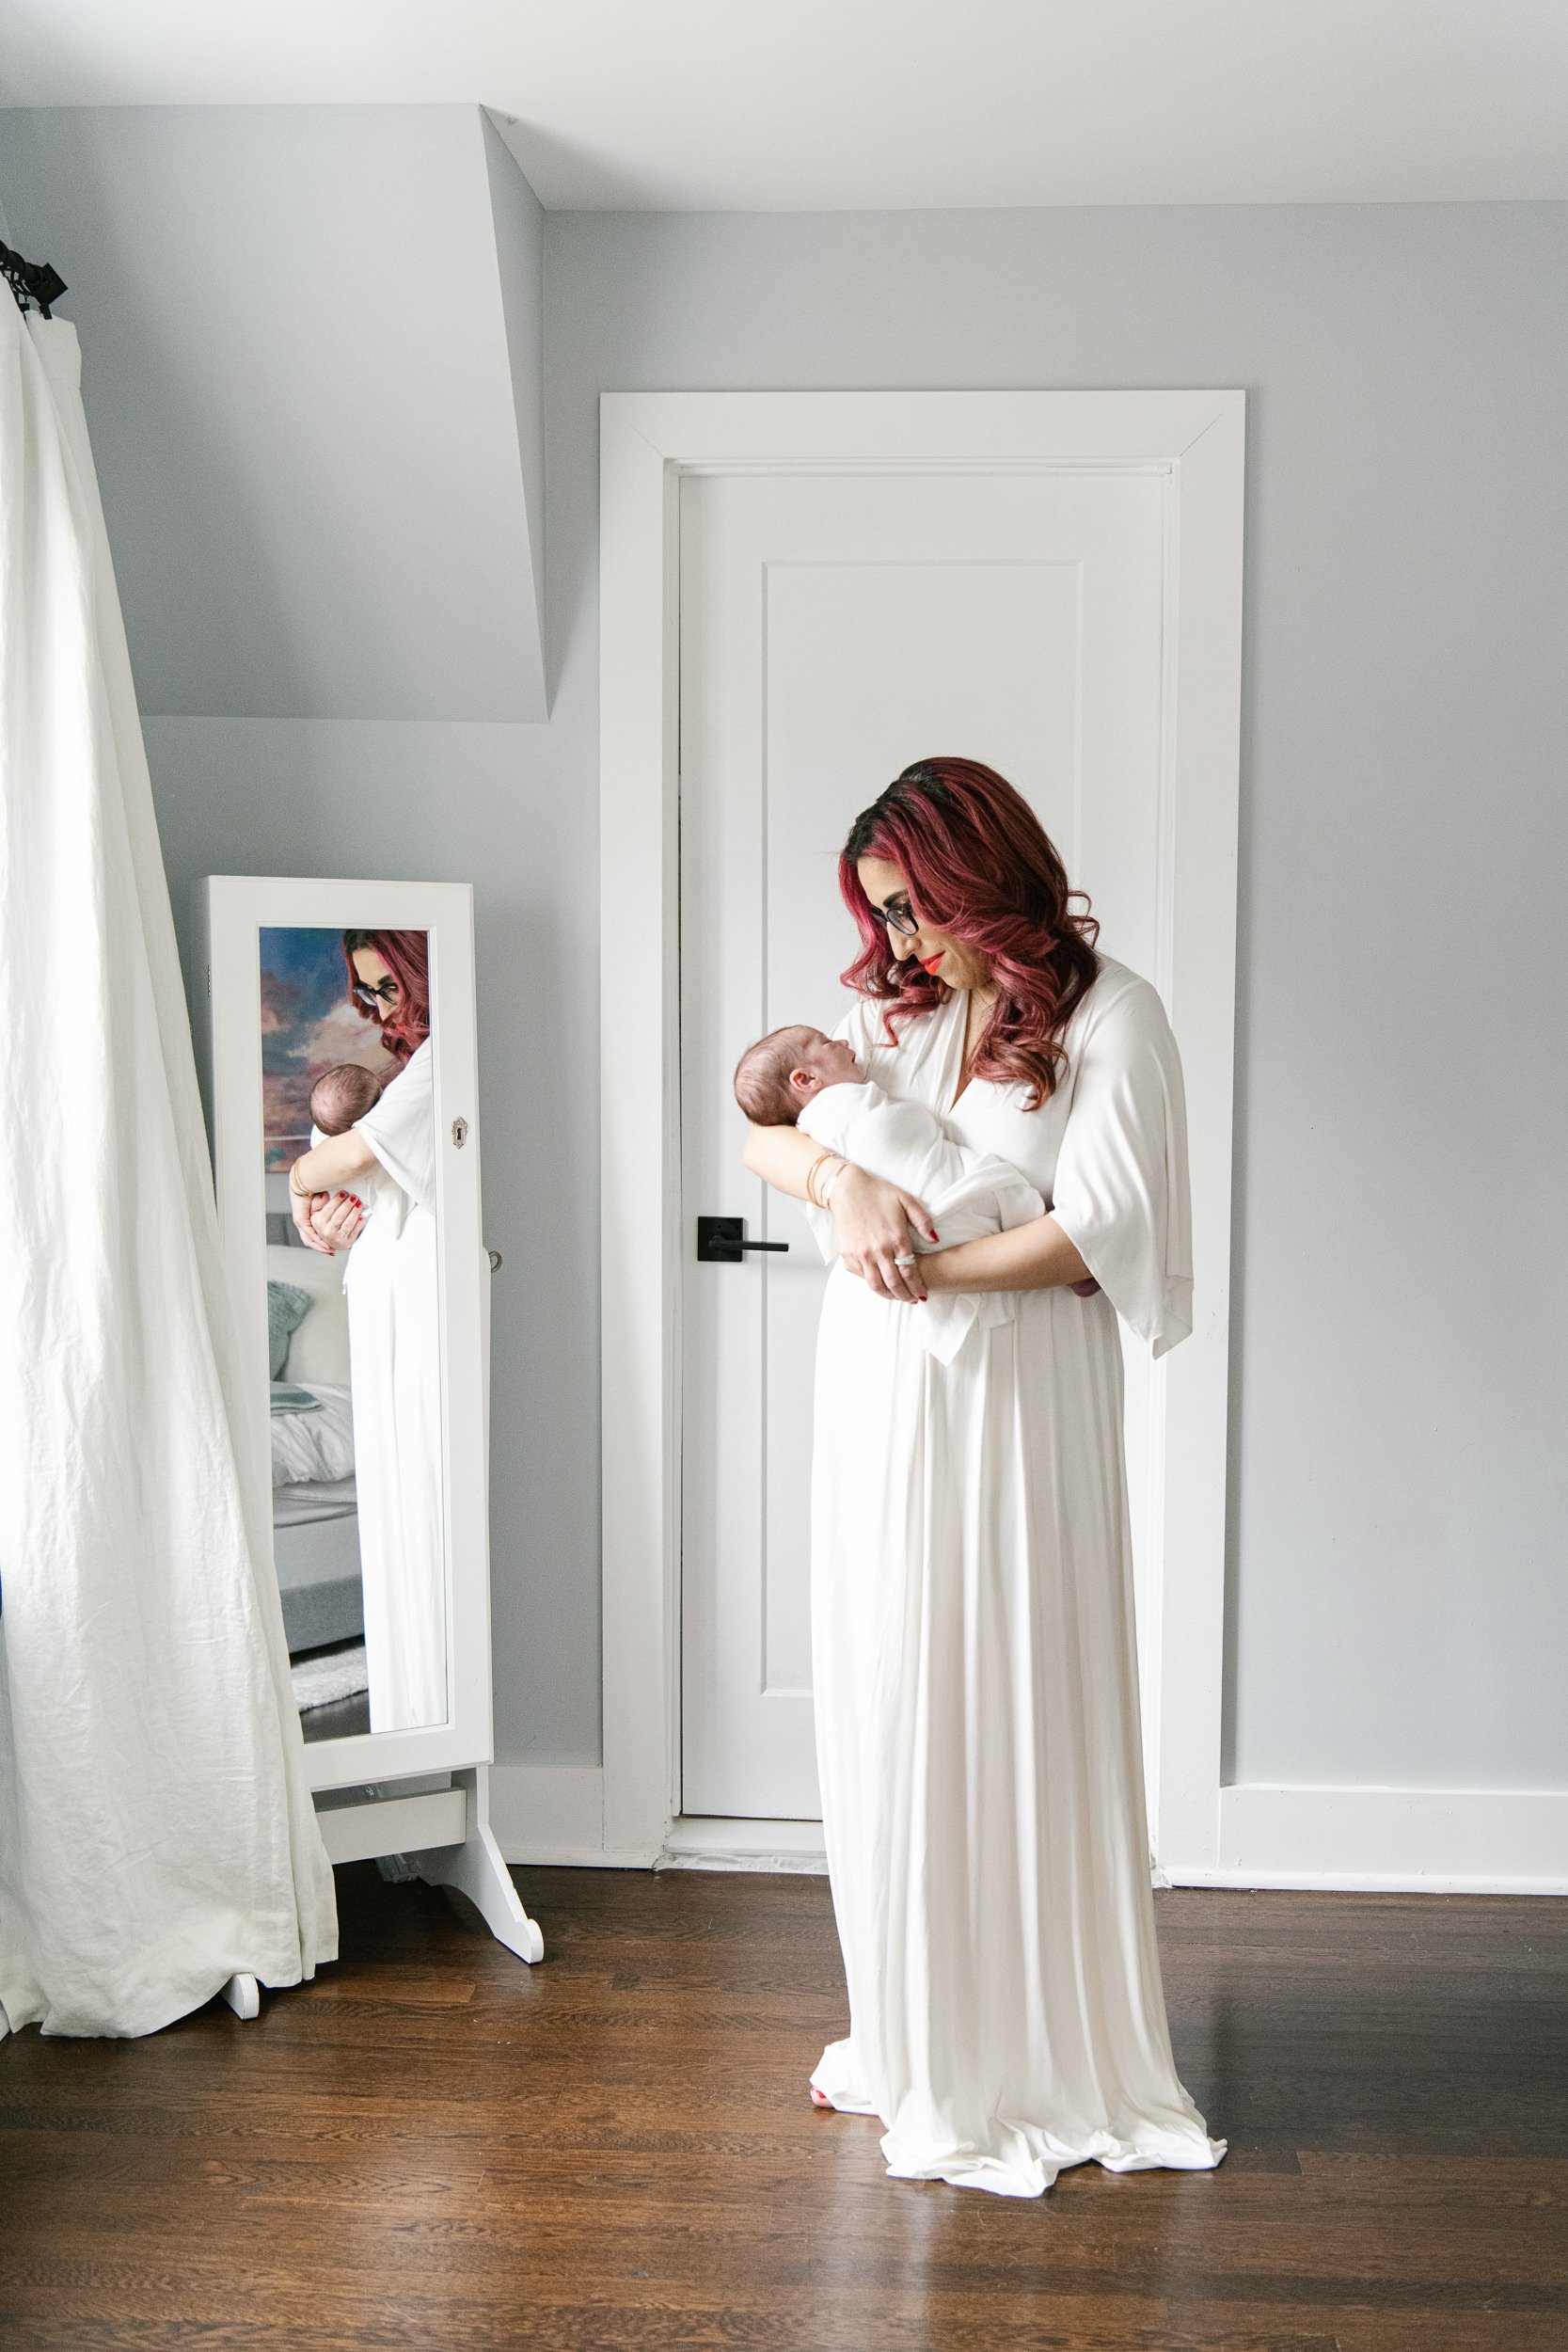  New Jersey newborn photographer captures a mother with her one-month-old in her home by Nicole Hawkins Photography. mother #NicoleHawkinsPhotography #NicoleHawkinsFamily #Newborns #InHomeNewborns #NicoleHawkinsNewborns #NJnewborns #babygirl 